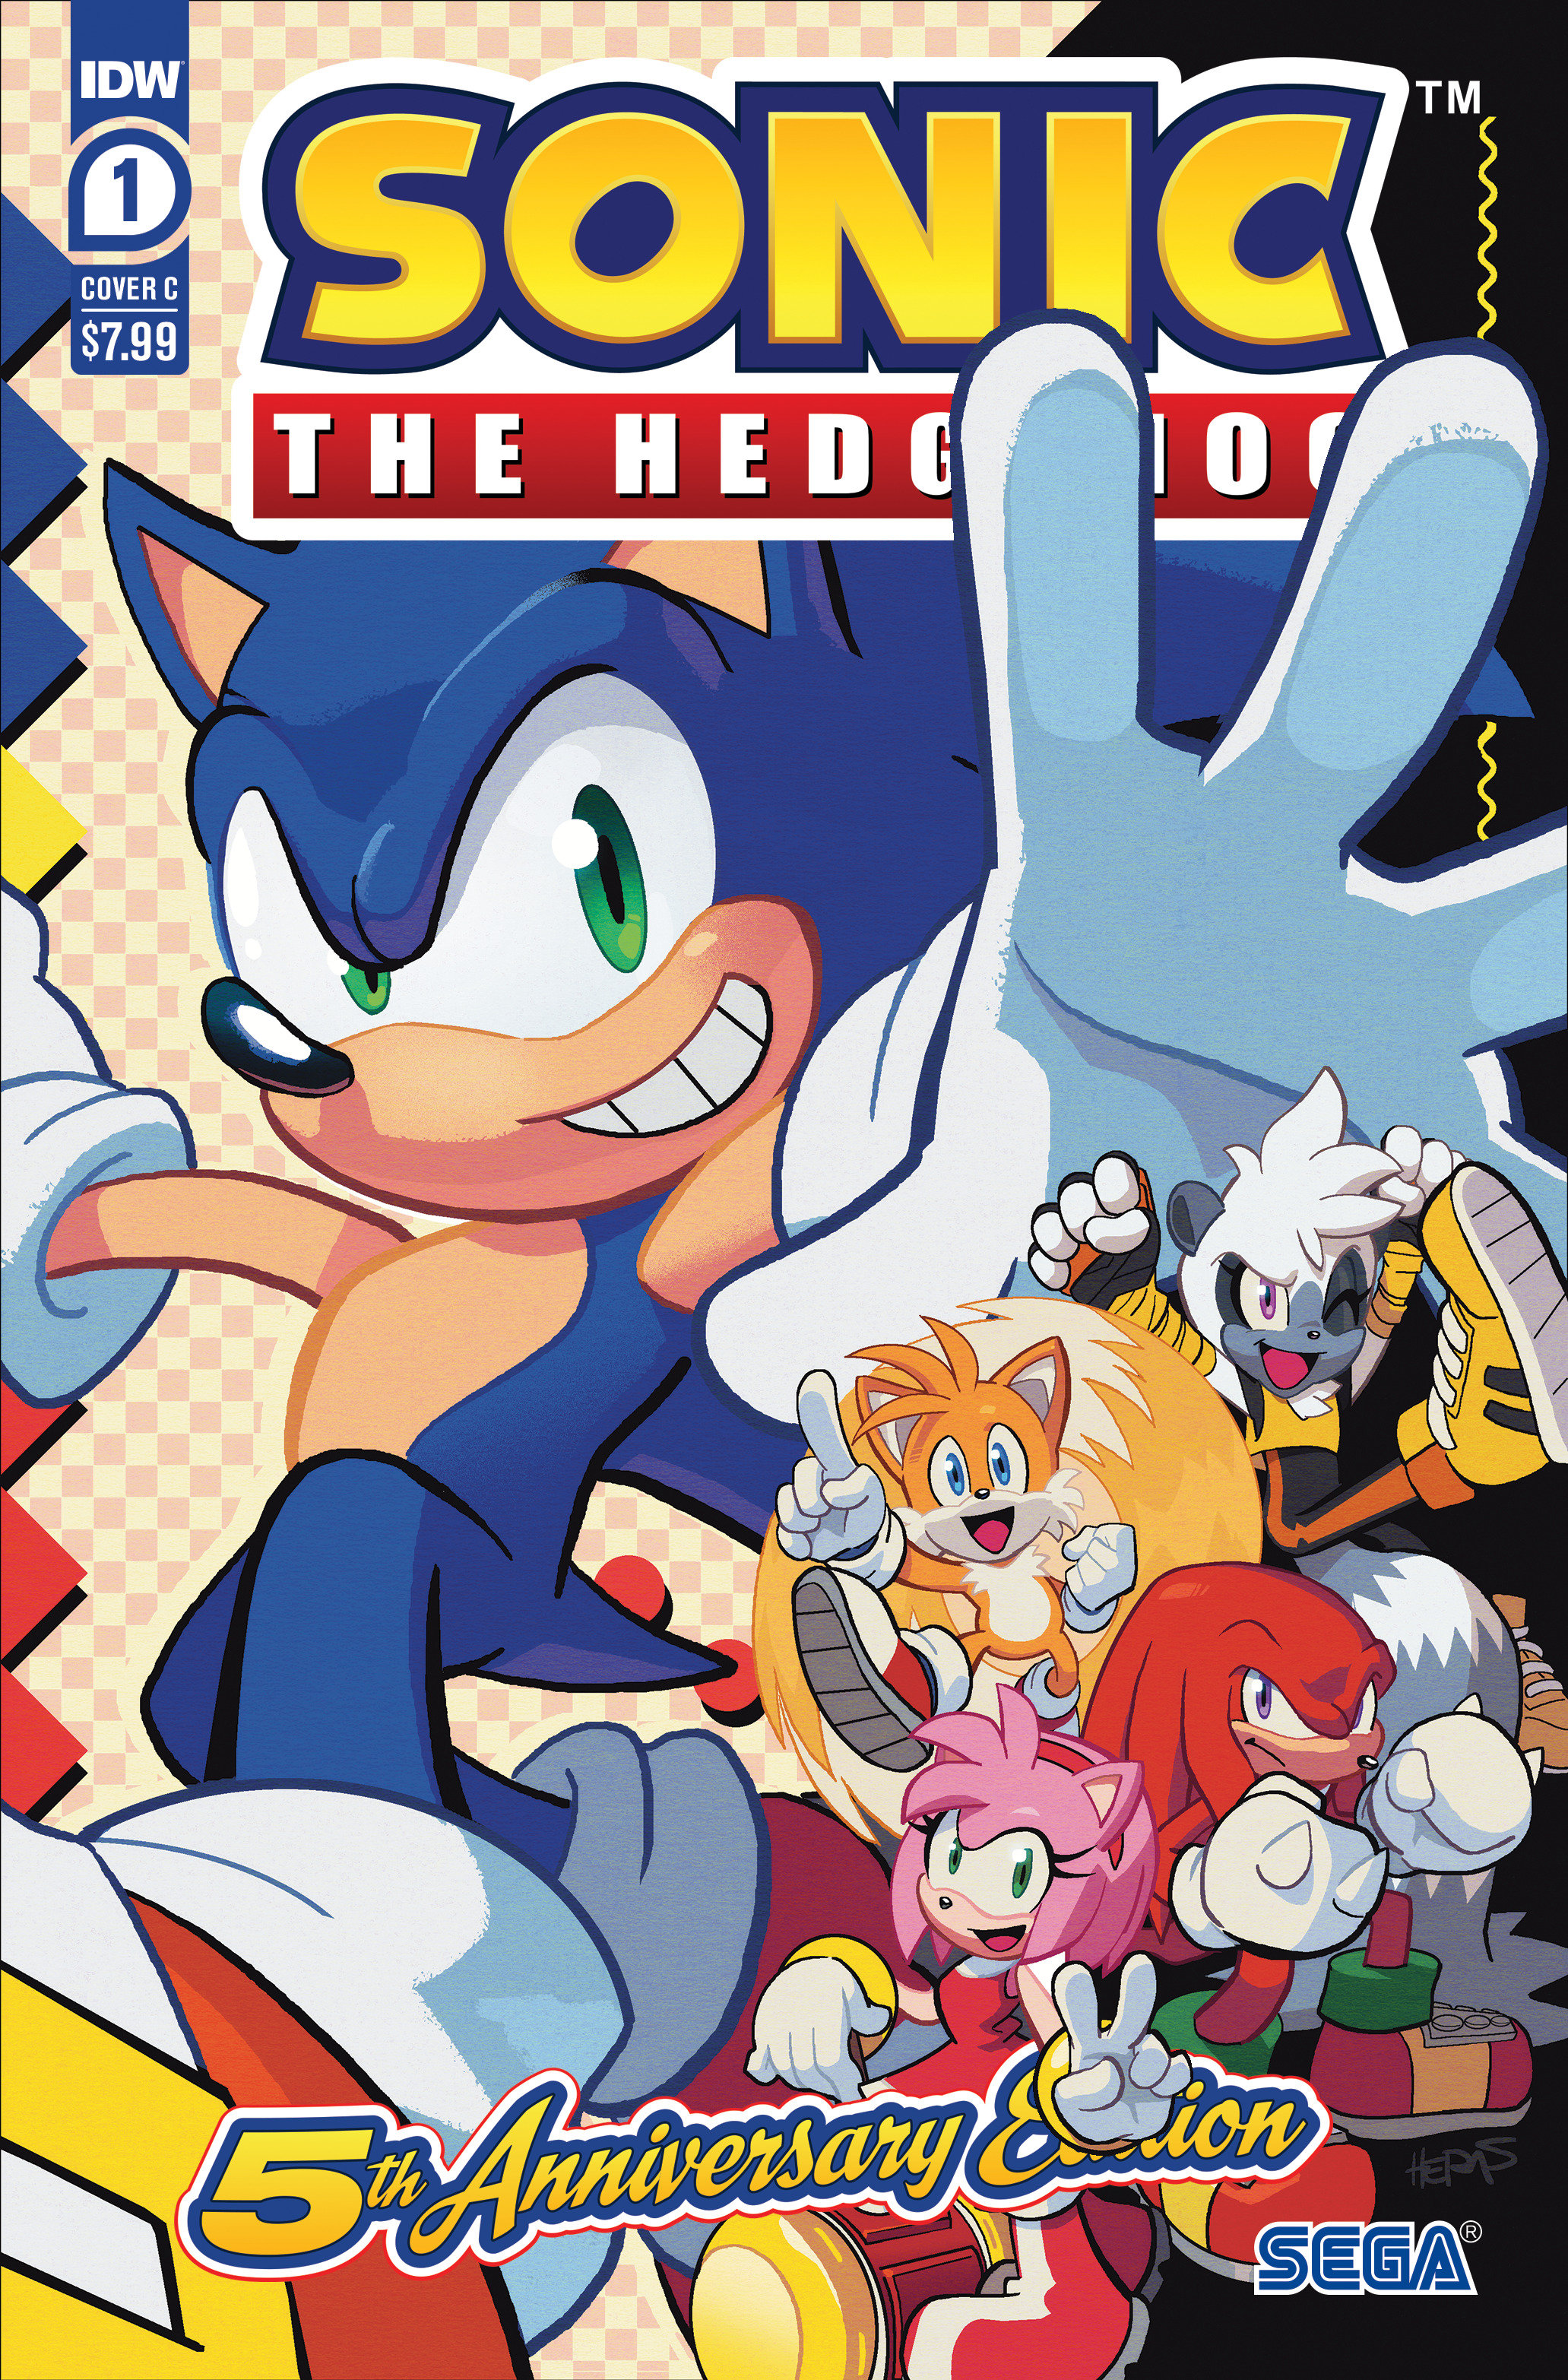 Sonic the Hedgehog #1 5th Anniversary Edition Cover C Herms